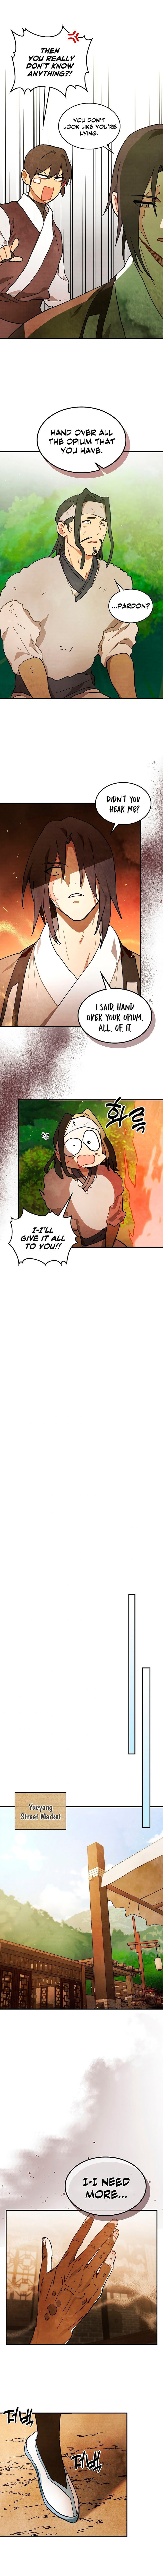 chronicles-of-the-martial-gods-return-chap-31-6